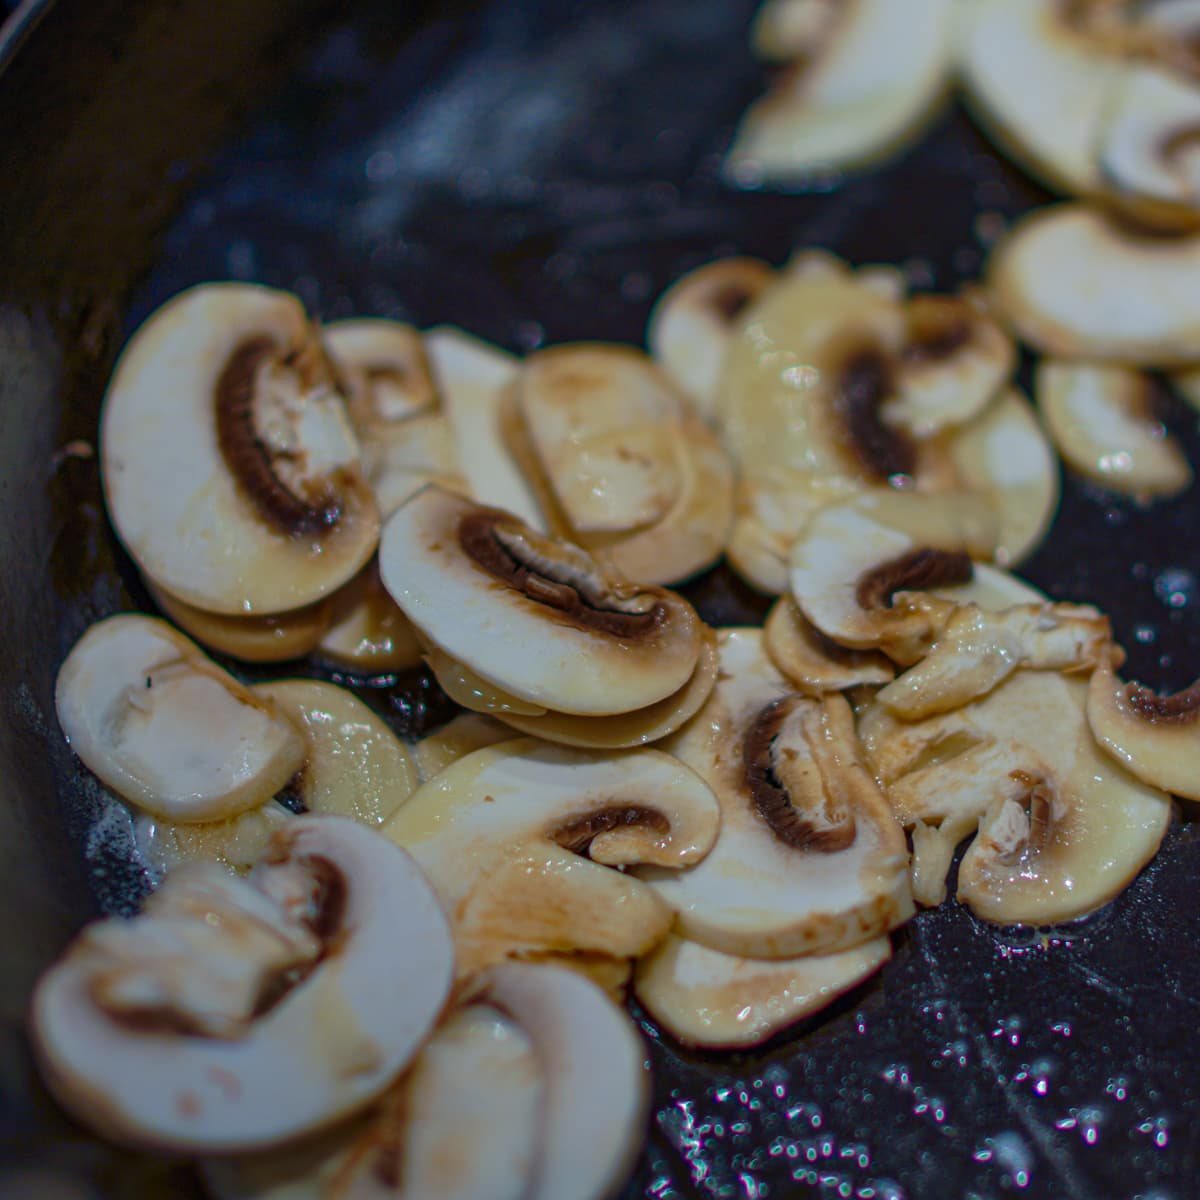 Mushrooms cooking in butter.